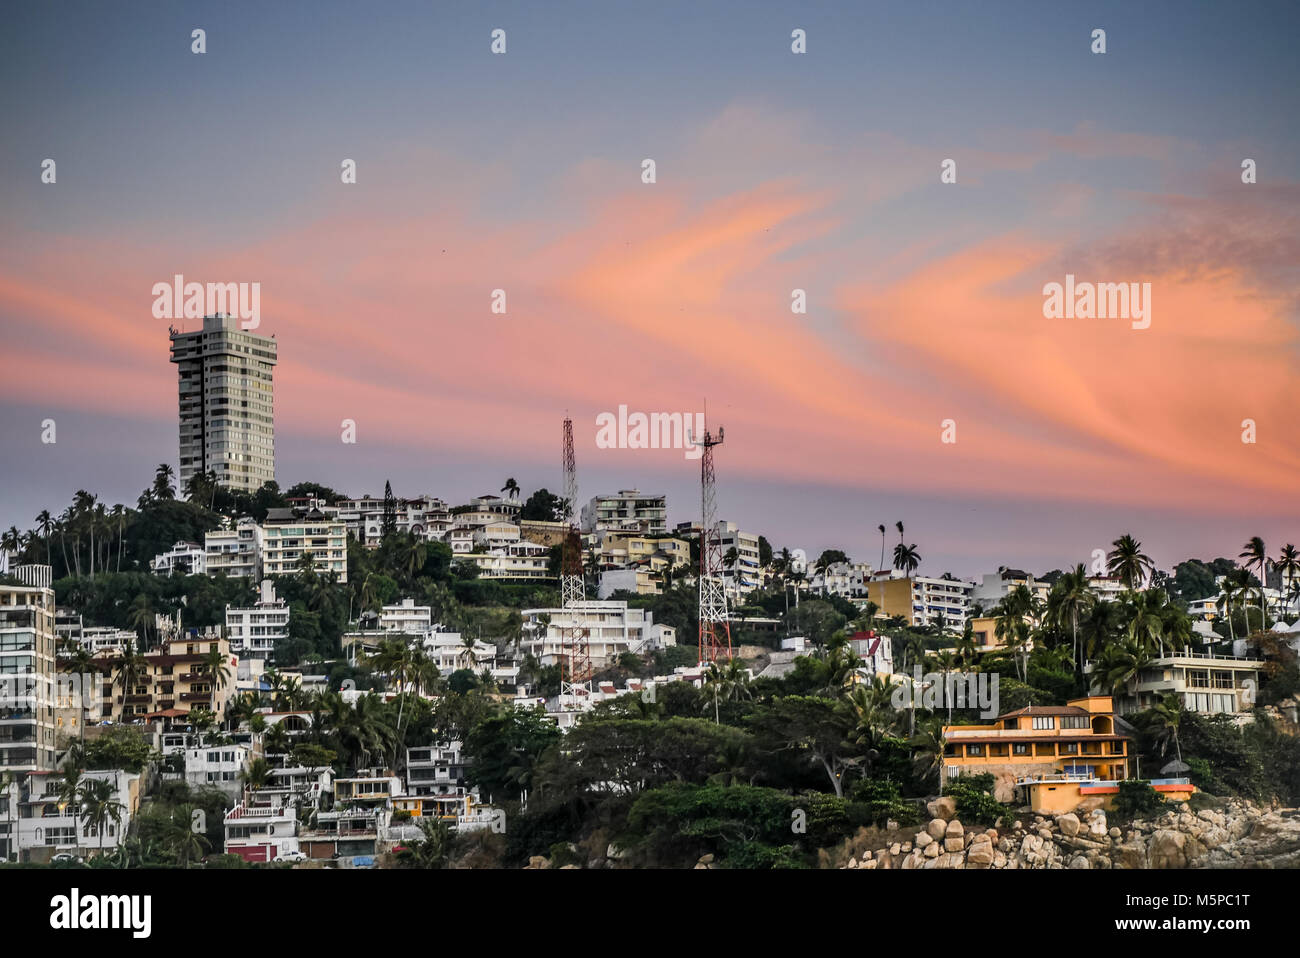 View of Acapulco neighborhood on a cliff with hotels and houses. Stock Photo